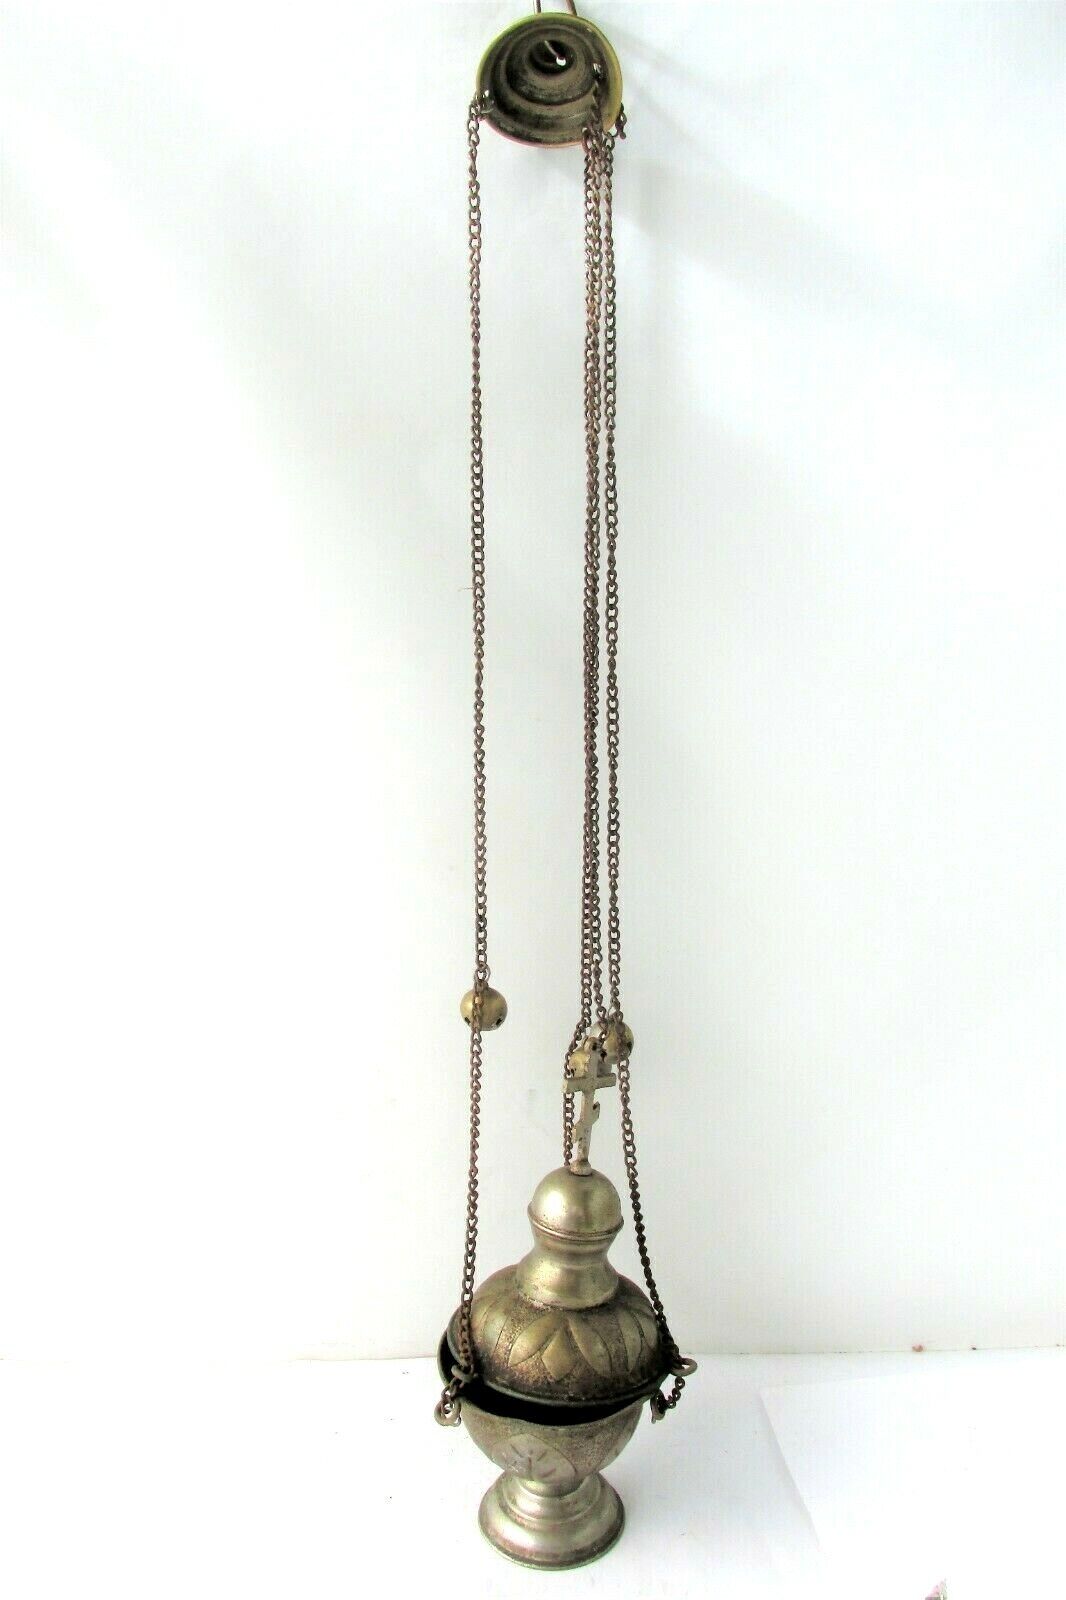 Old Orthodox priesthood incense burner thurible censer silver-plated